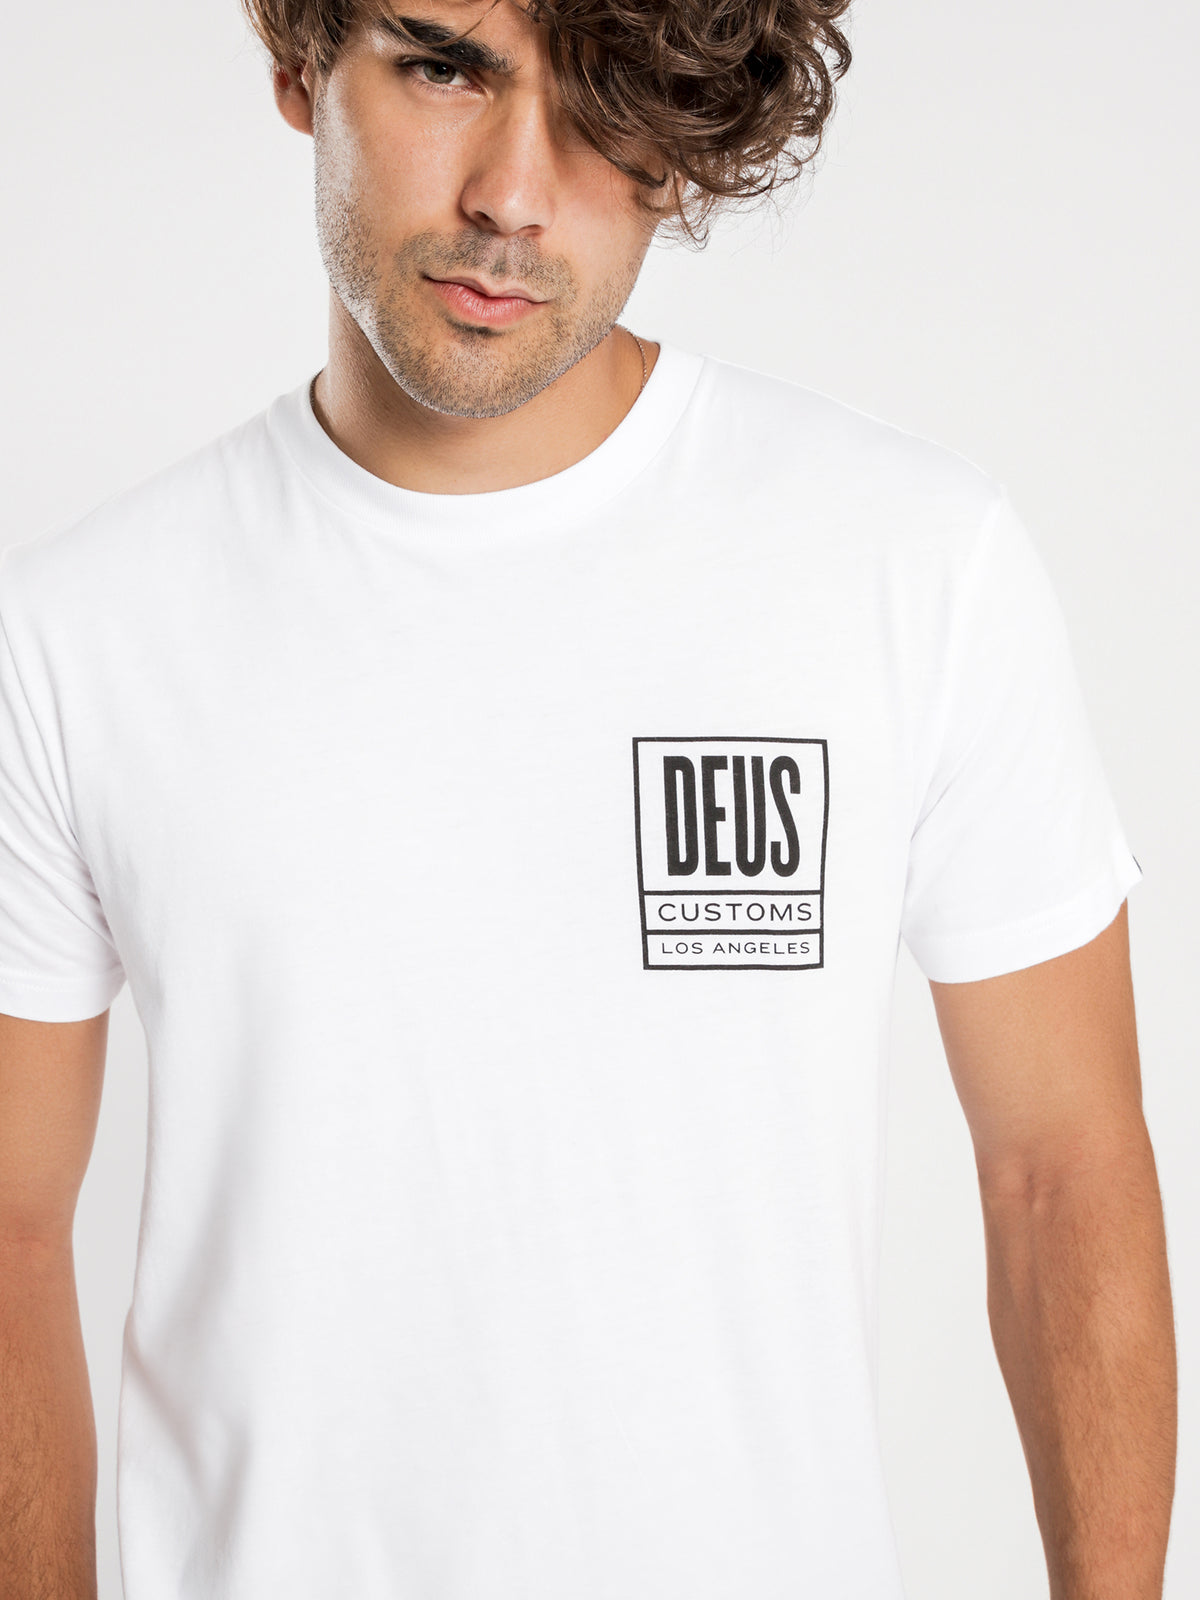 Deus Board and Cycle T-Shirt in White